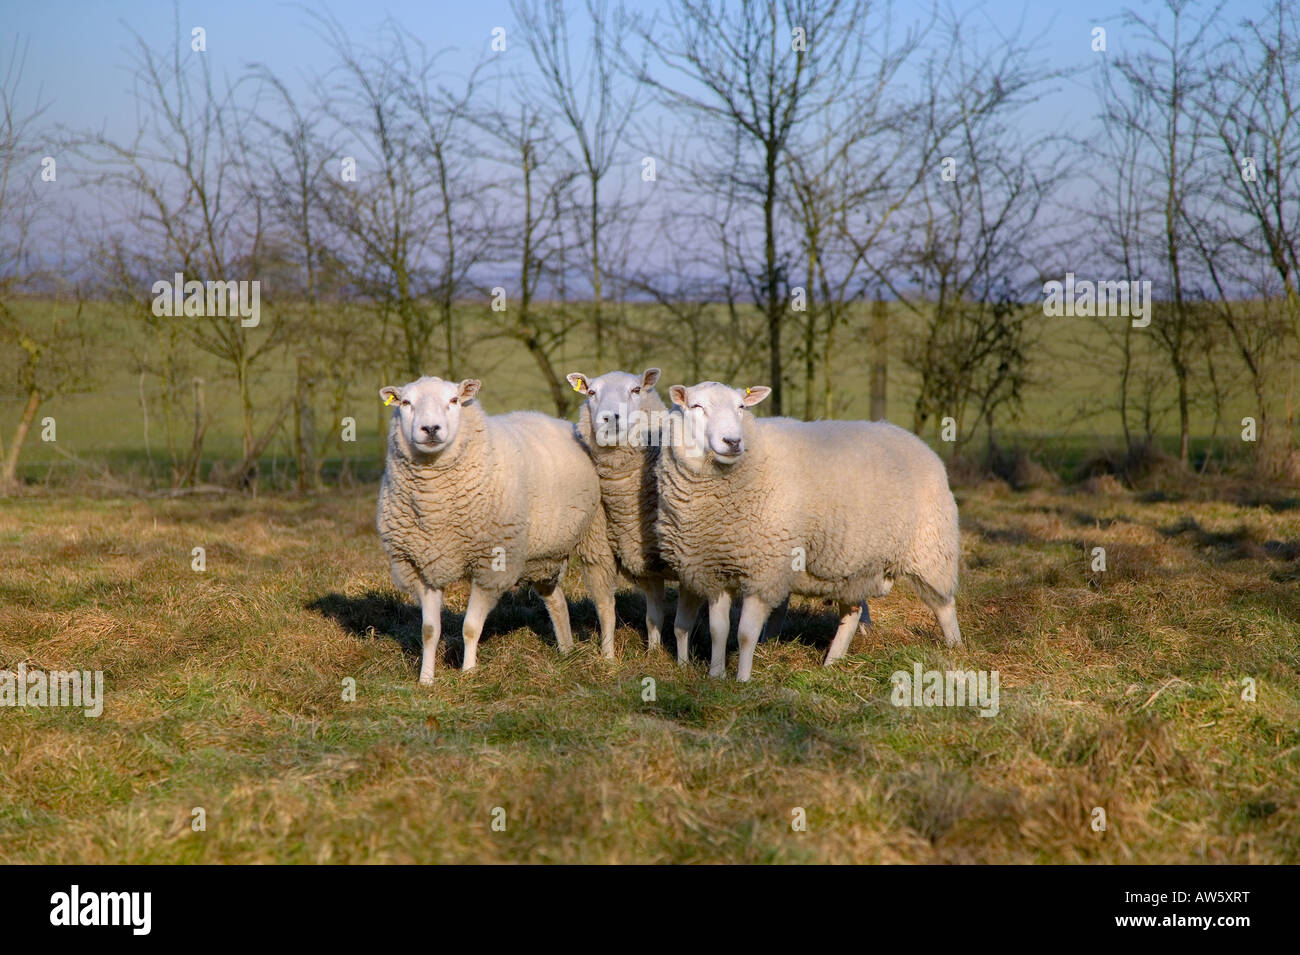 Three sheep in a field lit by the setting winter sun Stock Photo